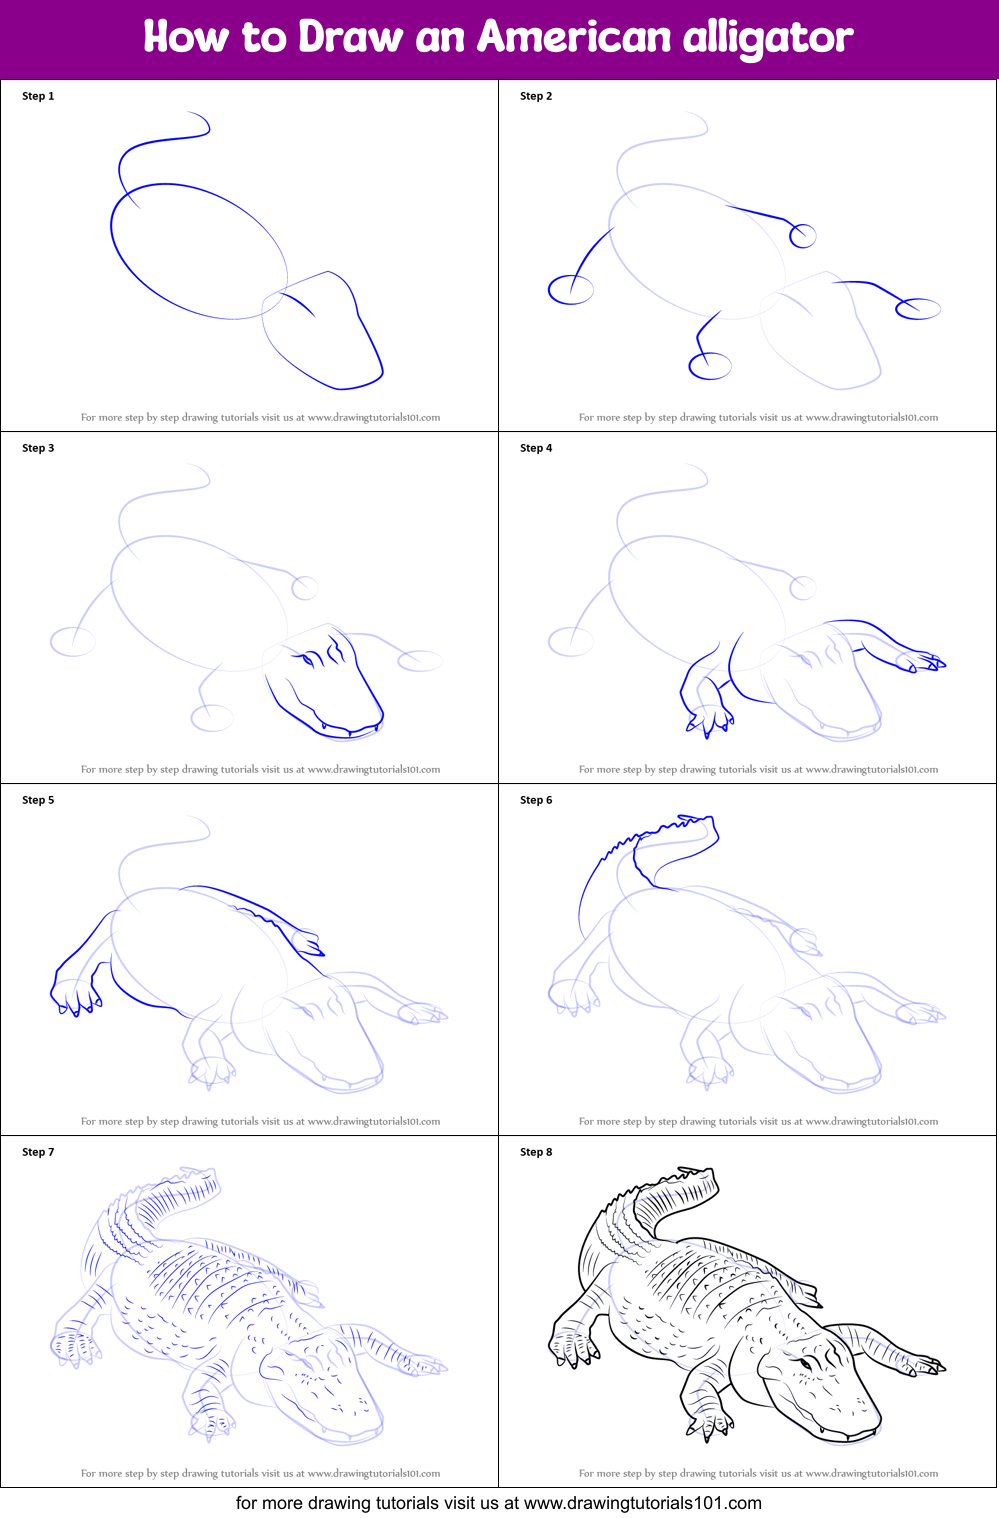 How to Draw an American alligator printable step by step drawing sheet